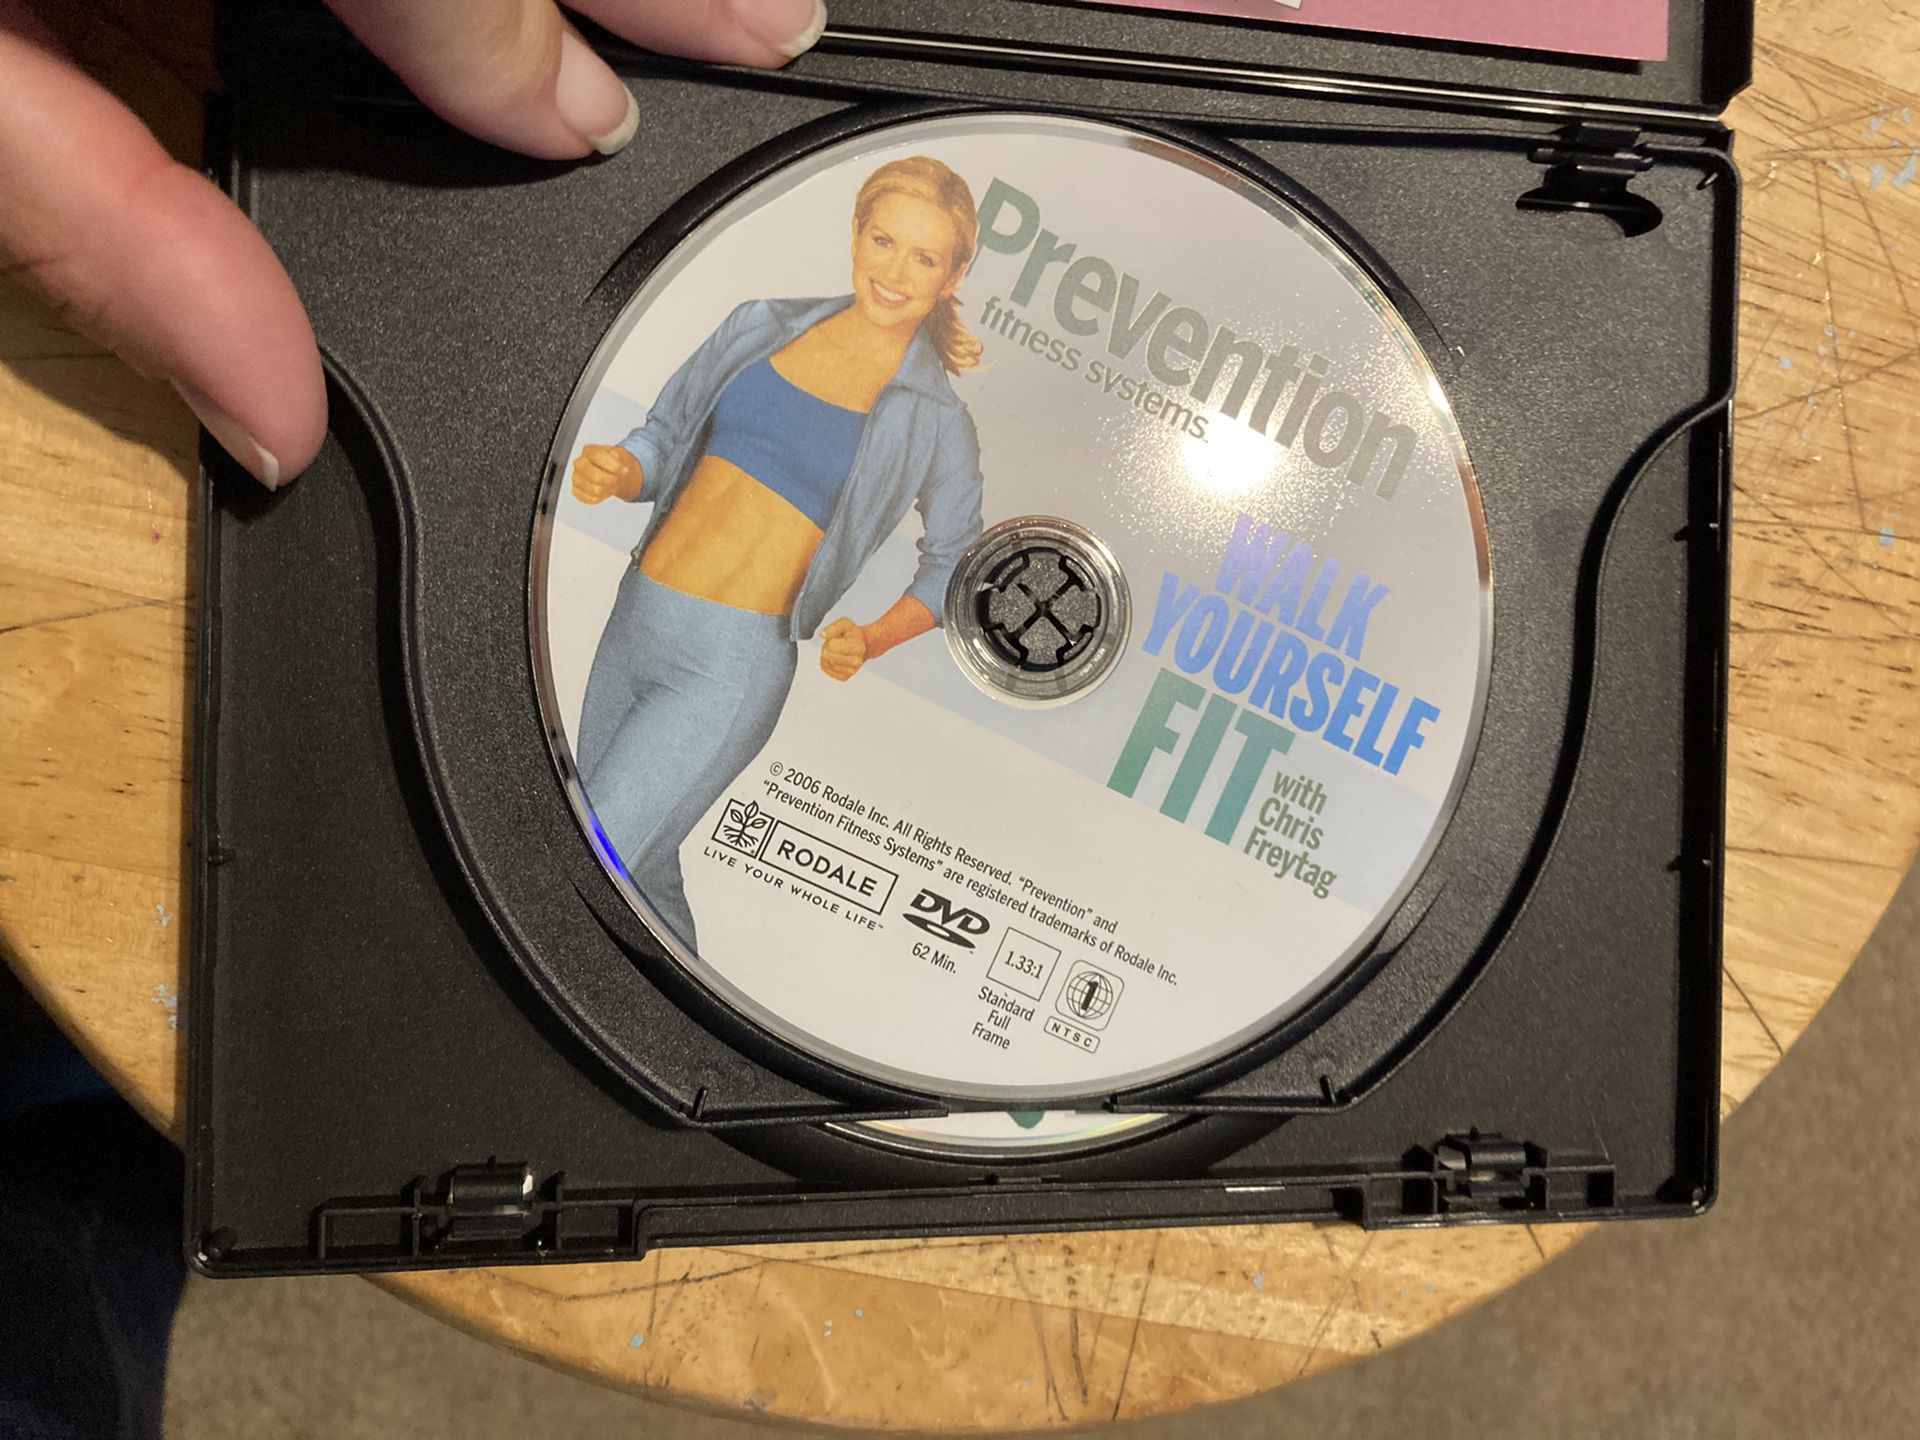 Prevention Work Out dVD